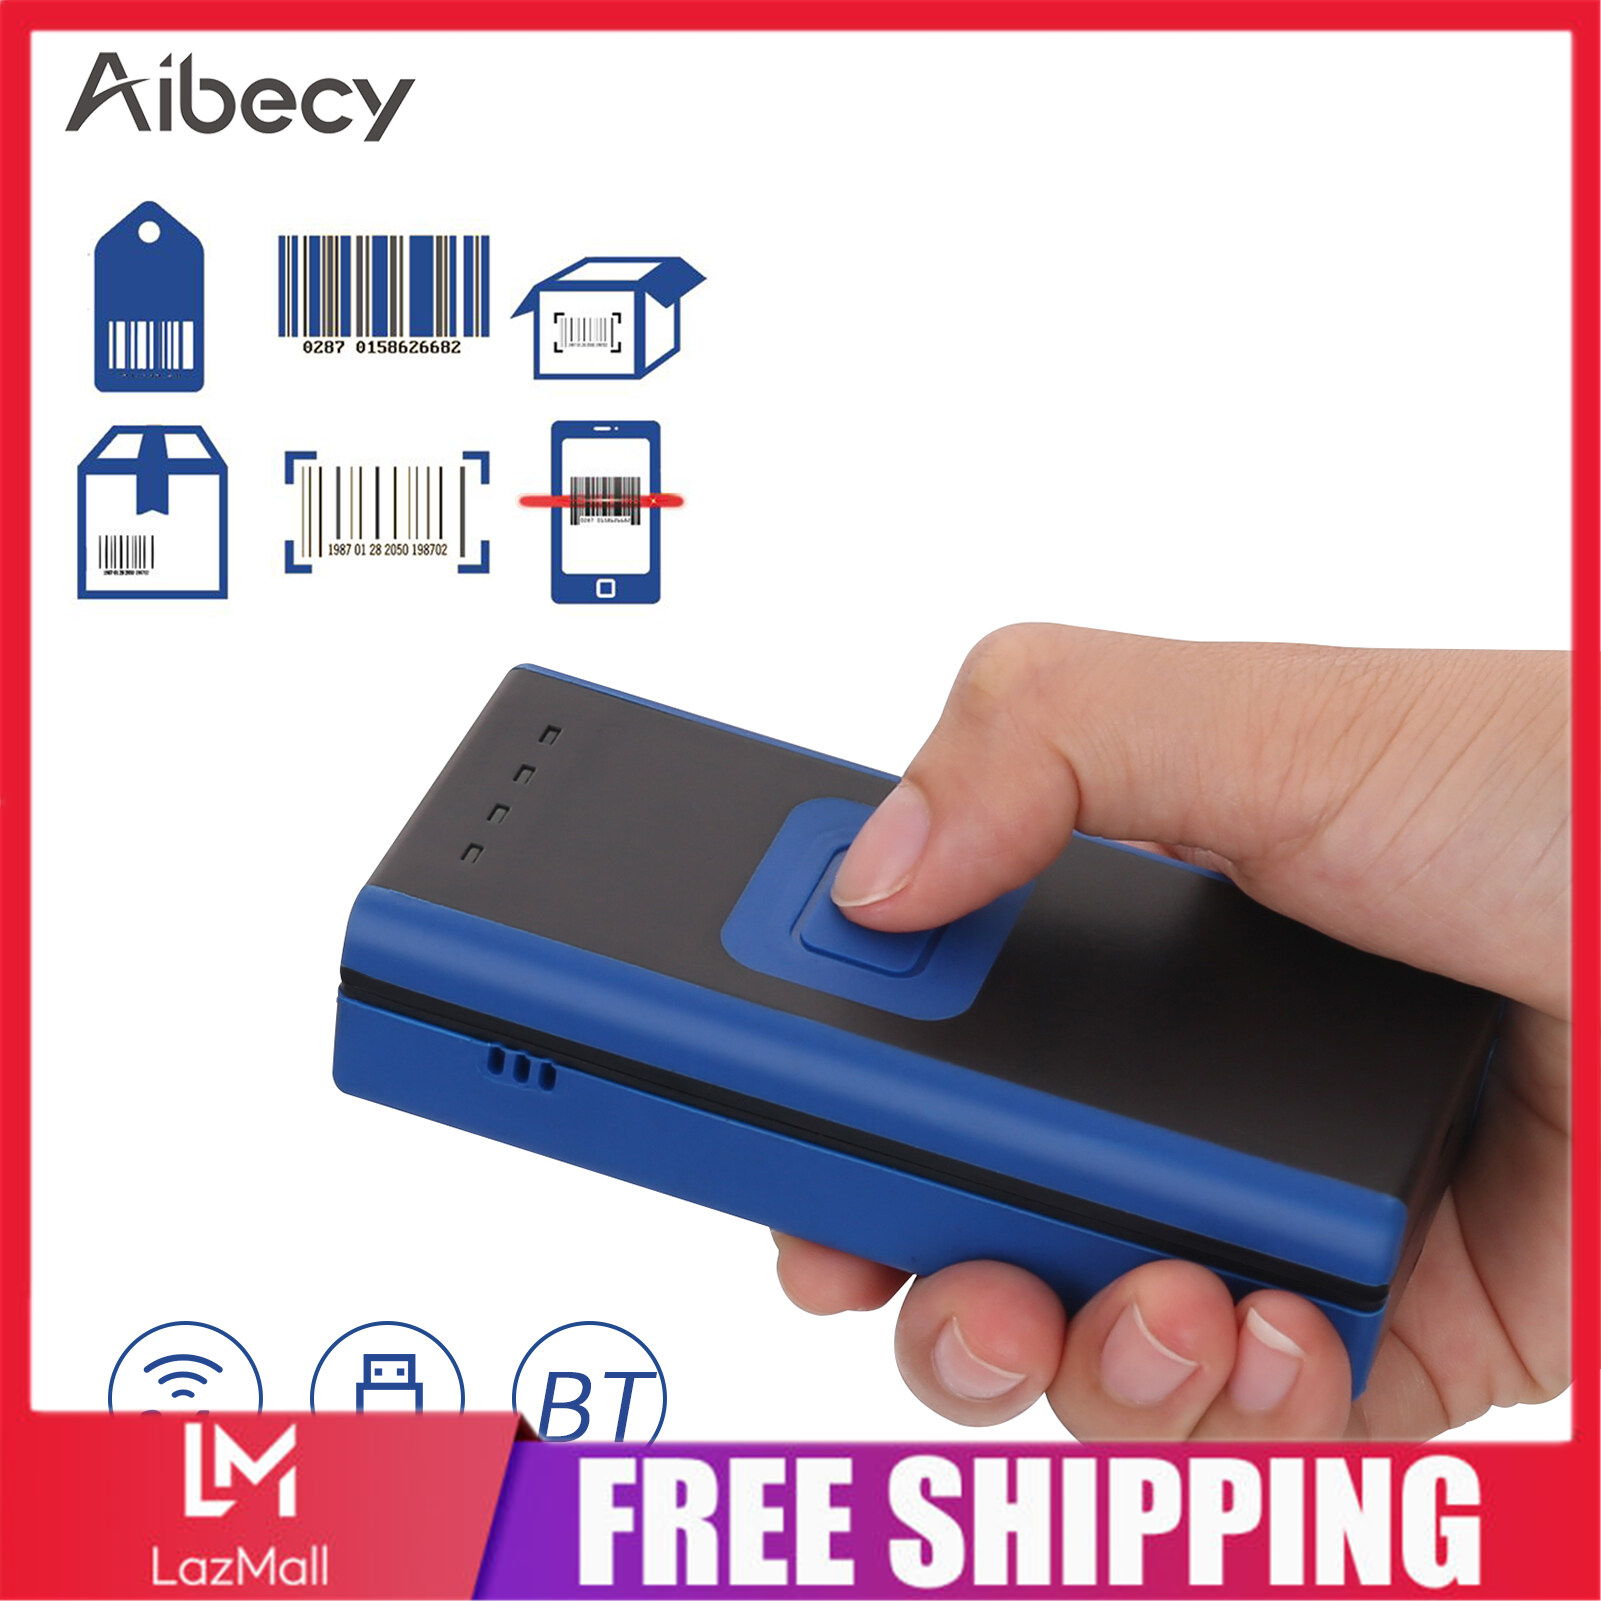 Aibecy Handheld 1D 2D QR Mini Barcode Scanner 3-in